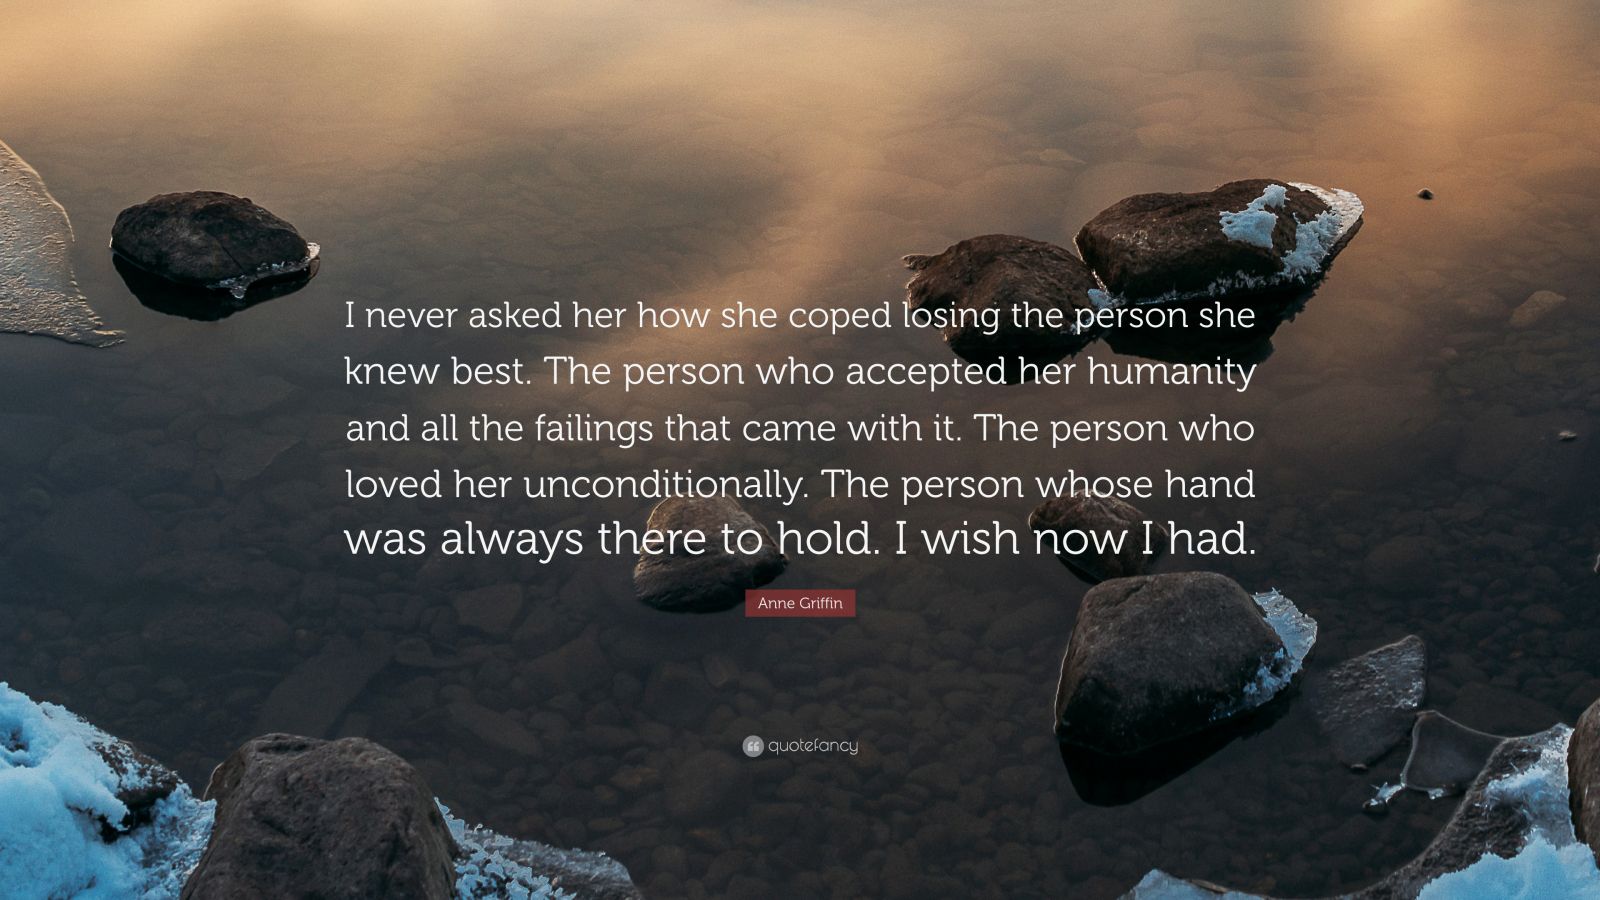 Anne Griffin Quote: “I never asked her how she coped losing the person ...